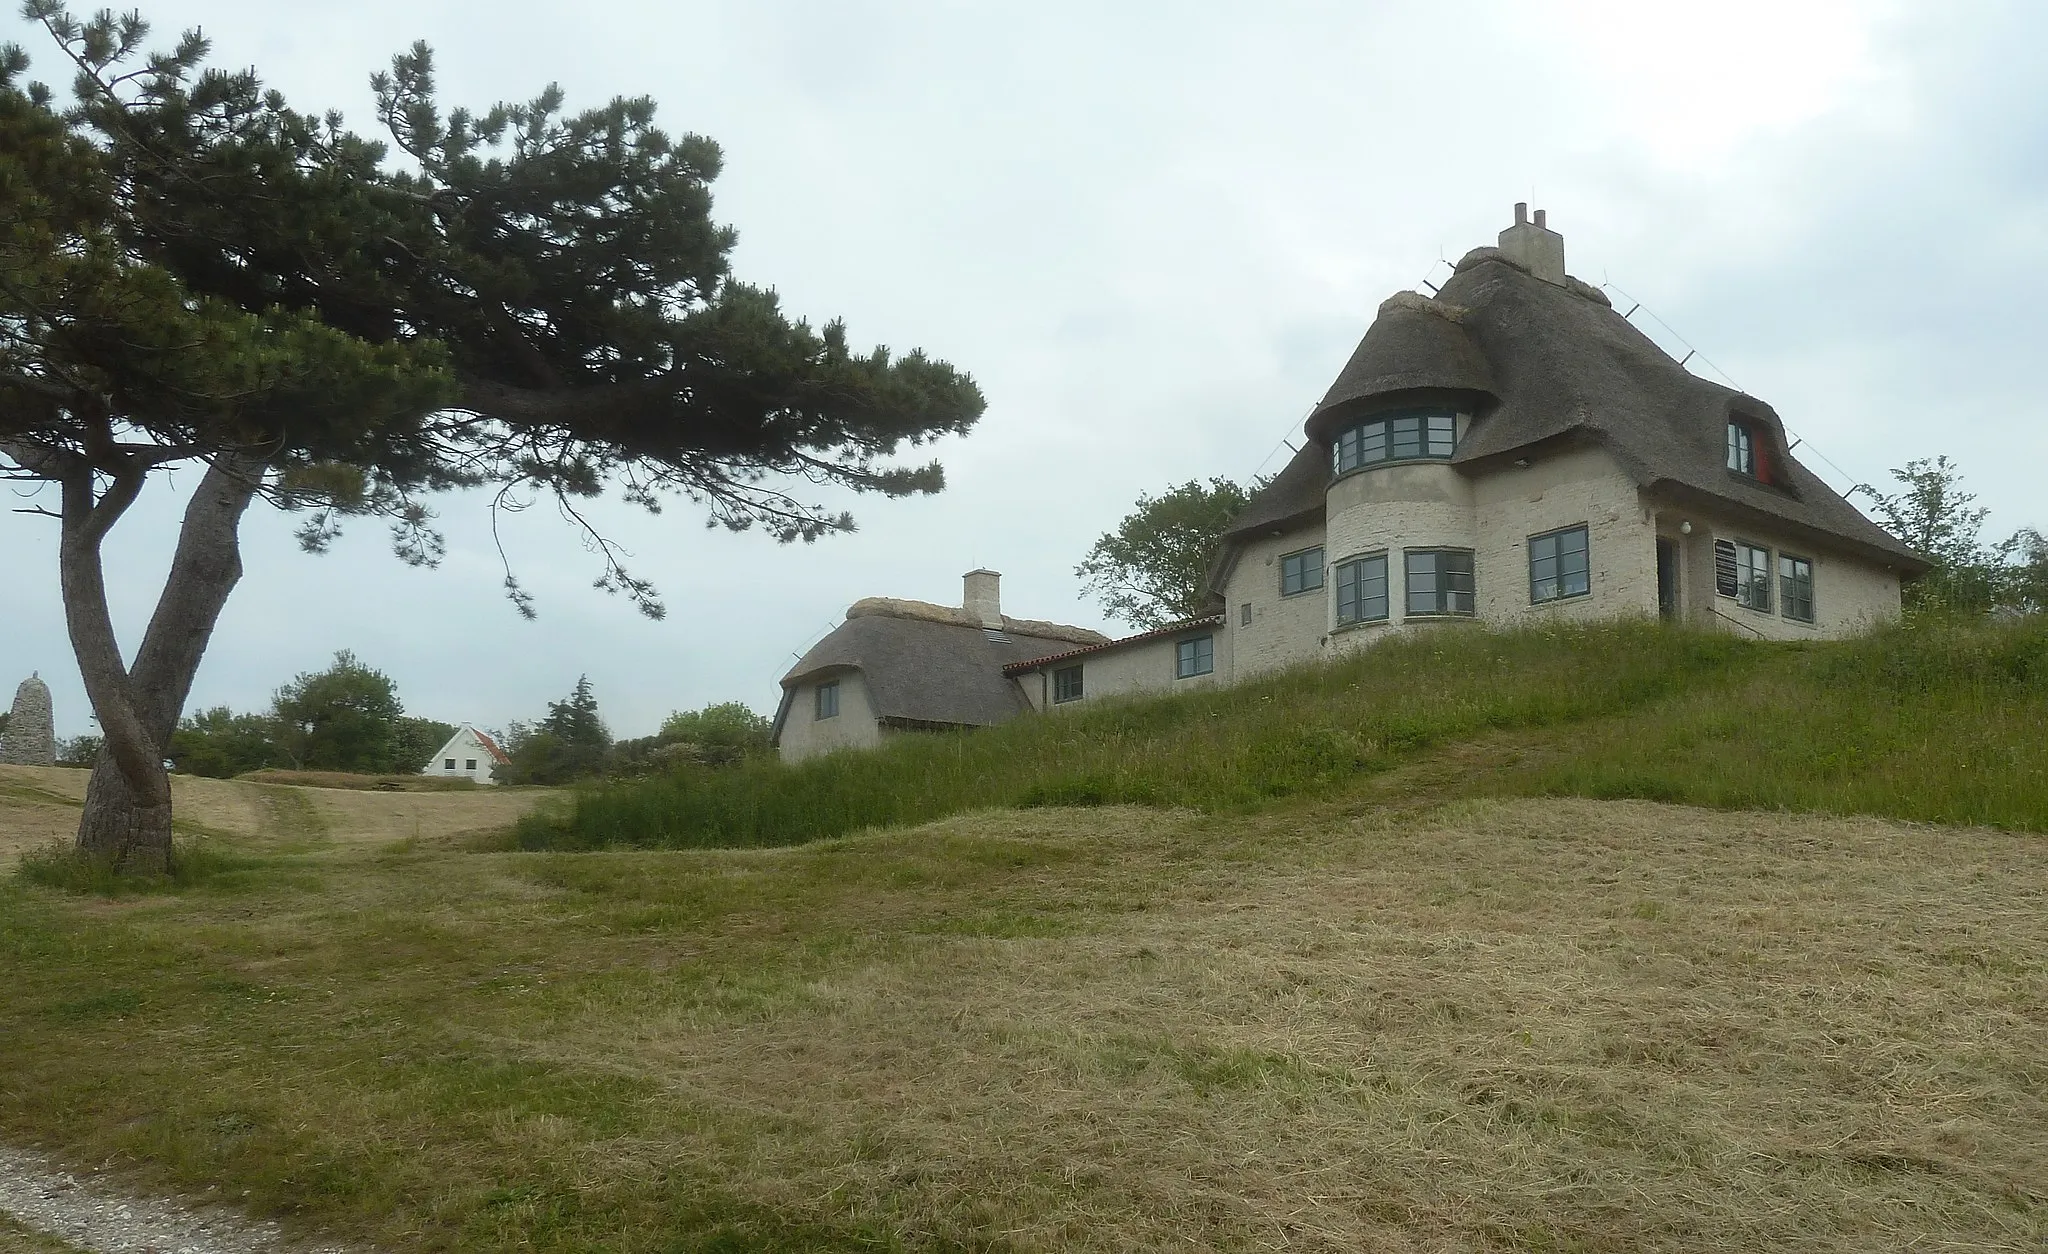 Photo showing: Knud Rasmussen House in Hundested, Denmark